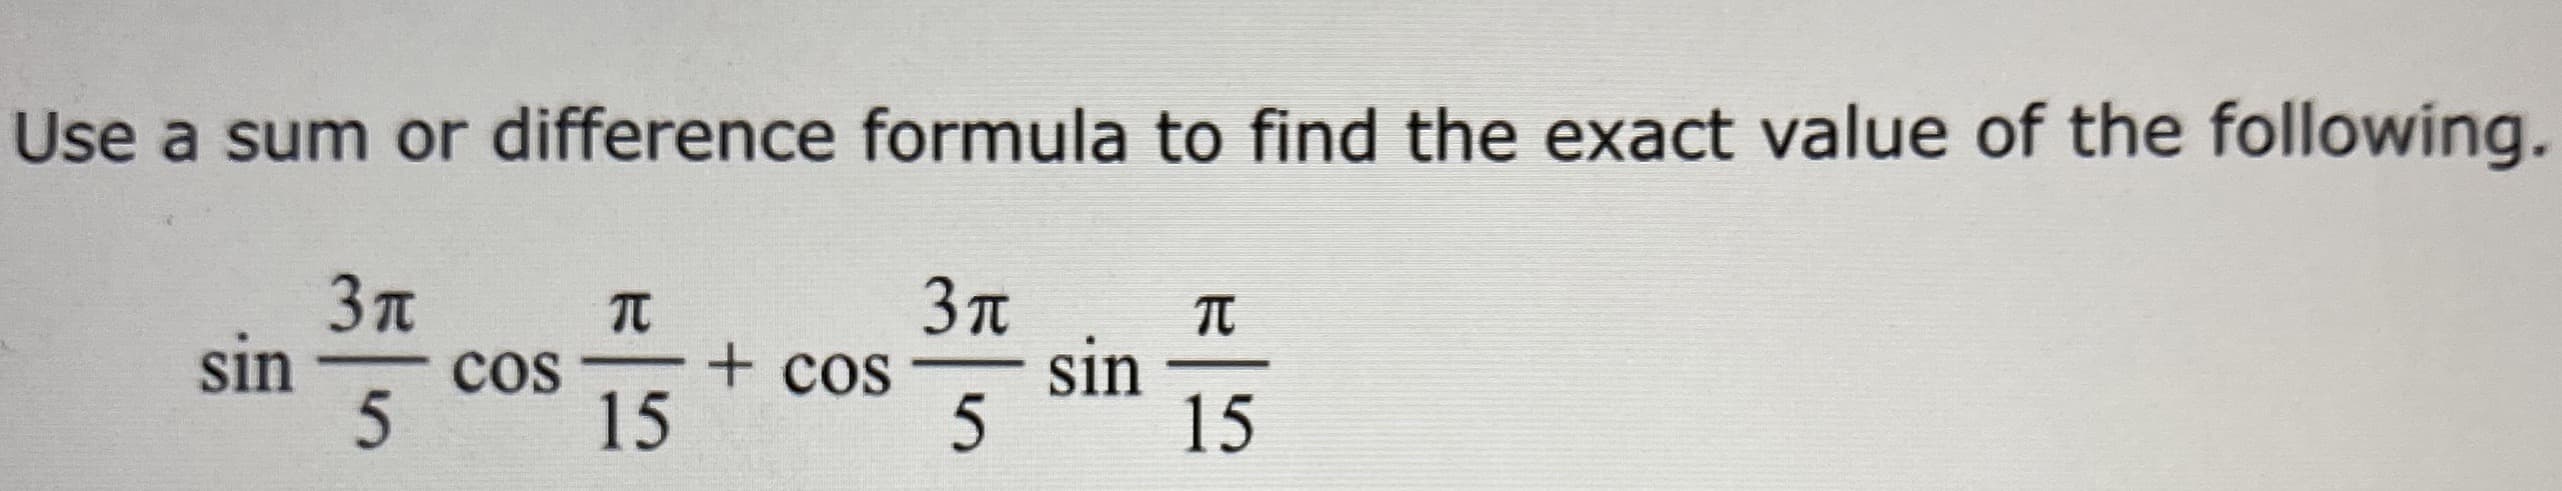 Use a sum or difference formula to find the exact value of the following.
3n
sin
cos
15
+ cos
sin
5
15
